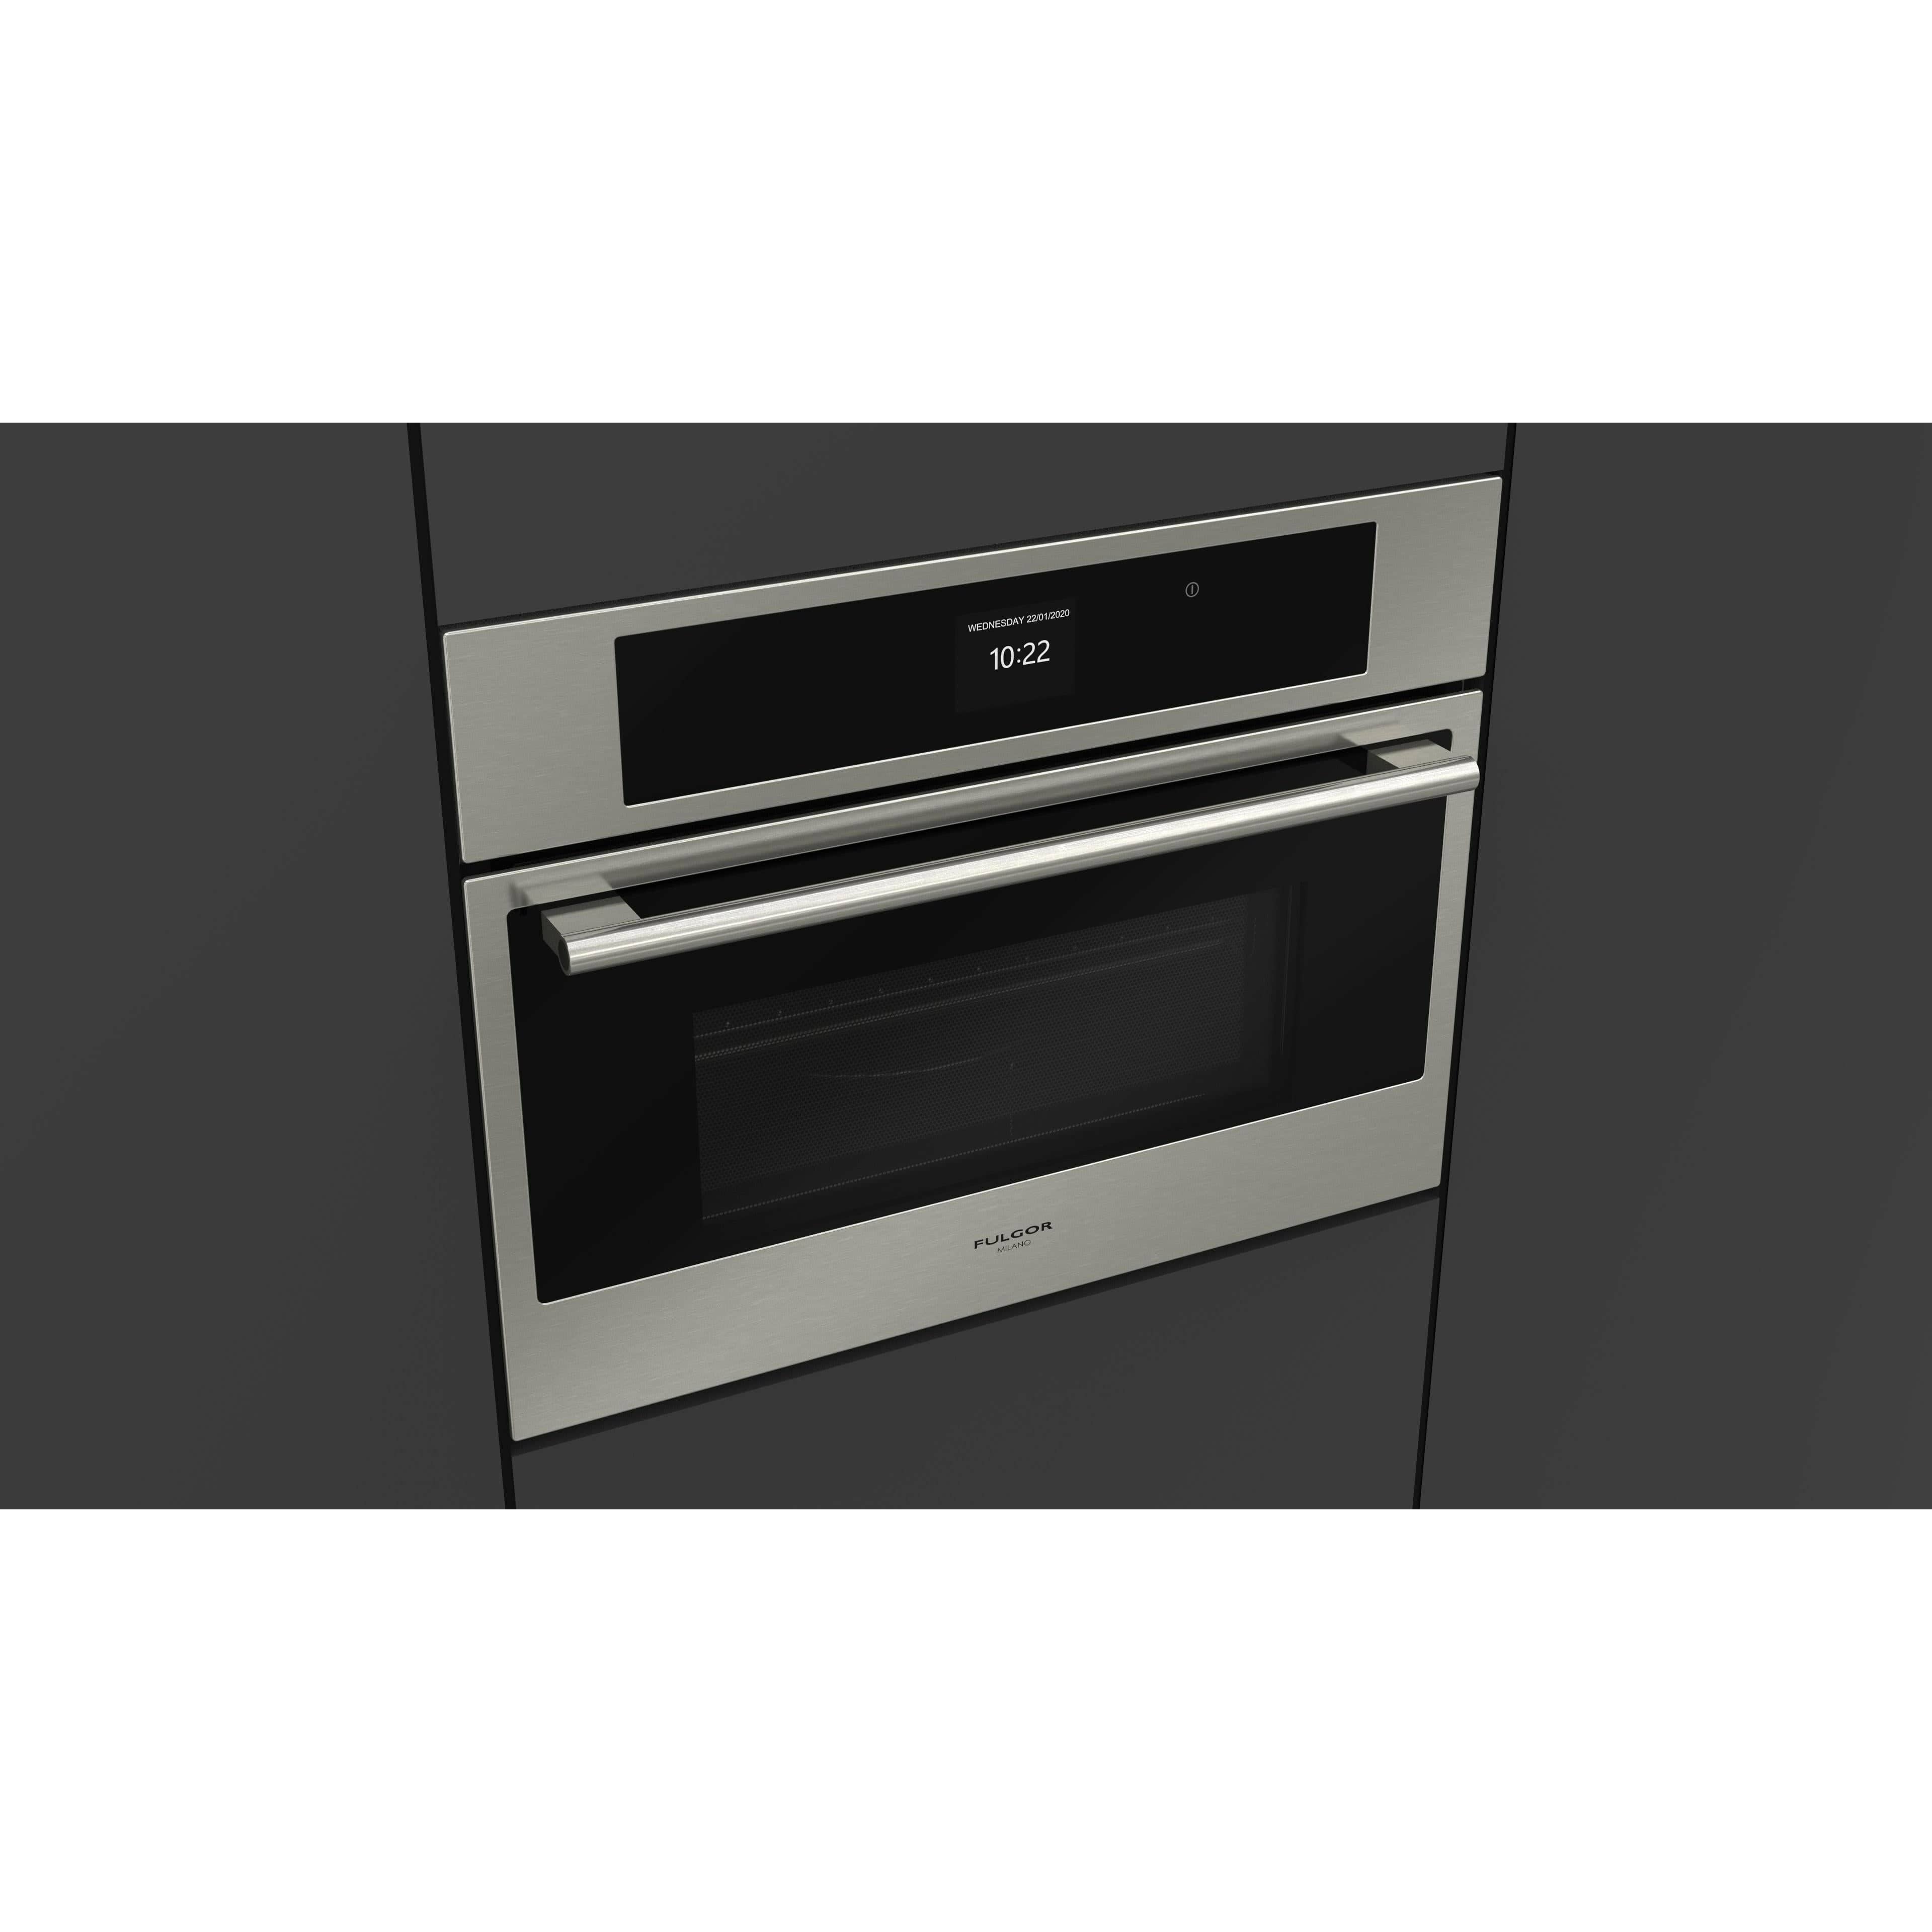 Fulgor Milano 24" 1.2 cu. ft. Total Capacity Electric Combination Single Wall Oven with 1 Oven Rack Convection - F7DSPD24S1 Ovens F7DSPD24S1 Luxury Appliances Direct